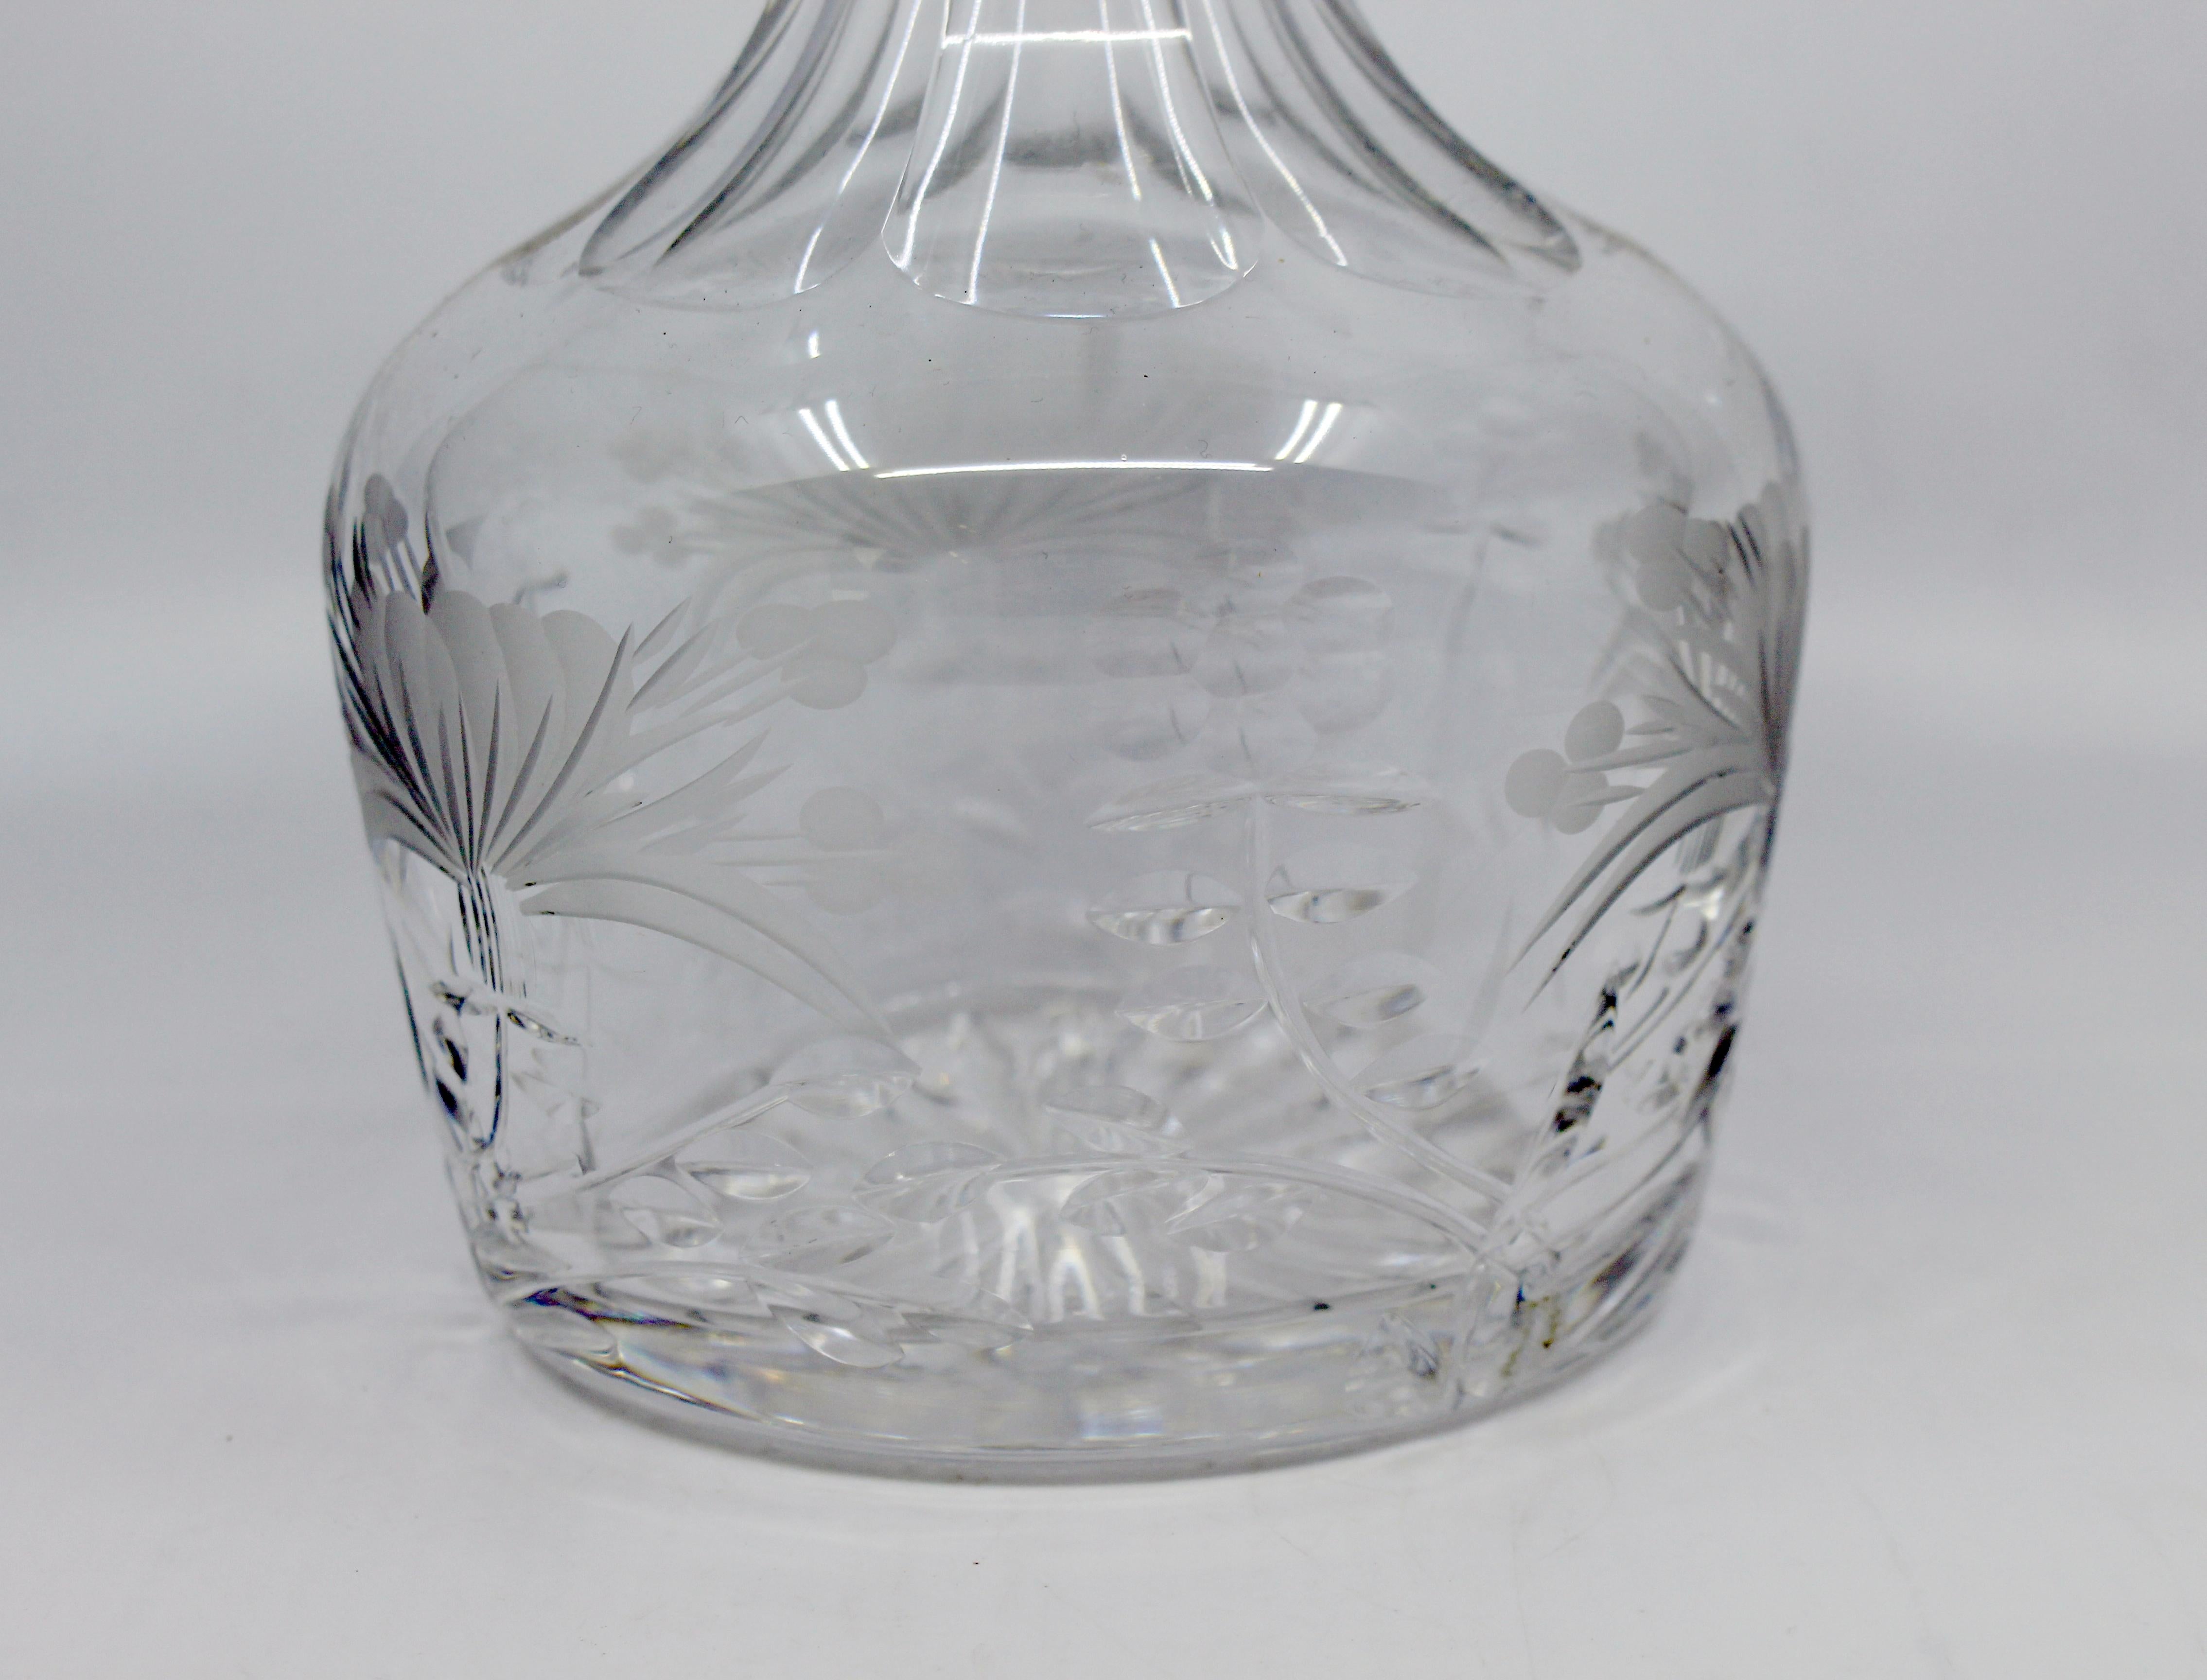 Royal Brierley Cut Glass Honeysuckle Mushroom Shaped Decanter In Good Condition For Sale In Worcester, Worcestershire